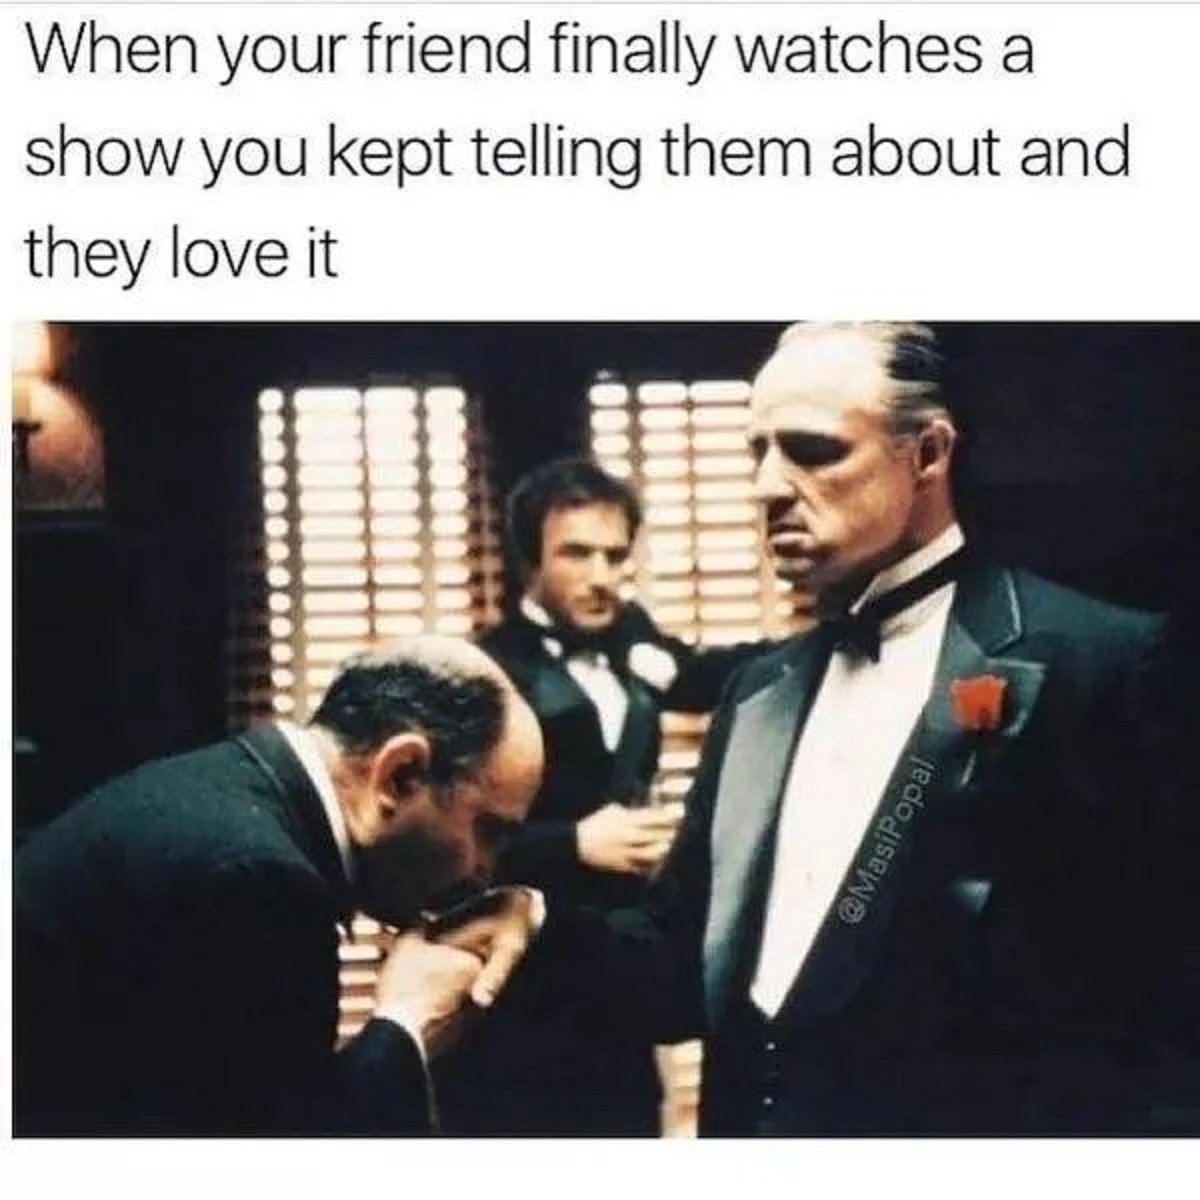 godfather kiss the ring meme - When your friend finally watches a show you kept telling them about and they love it